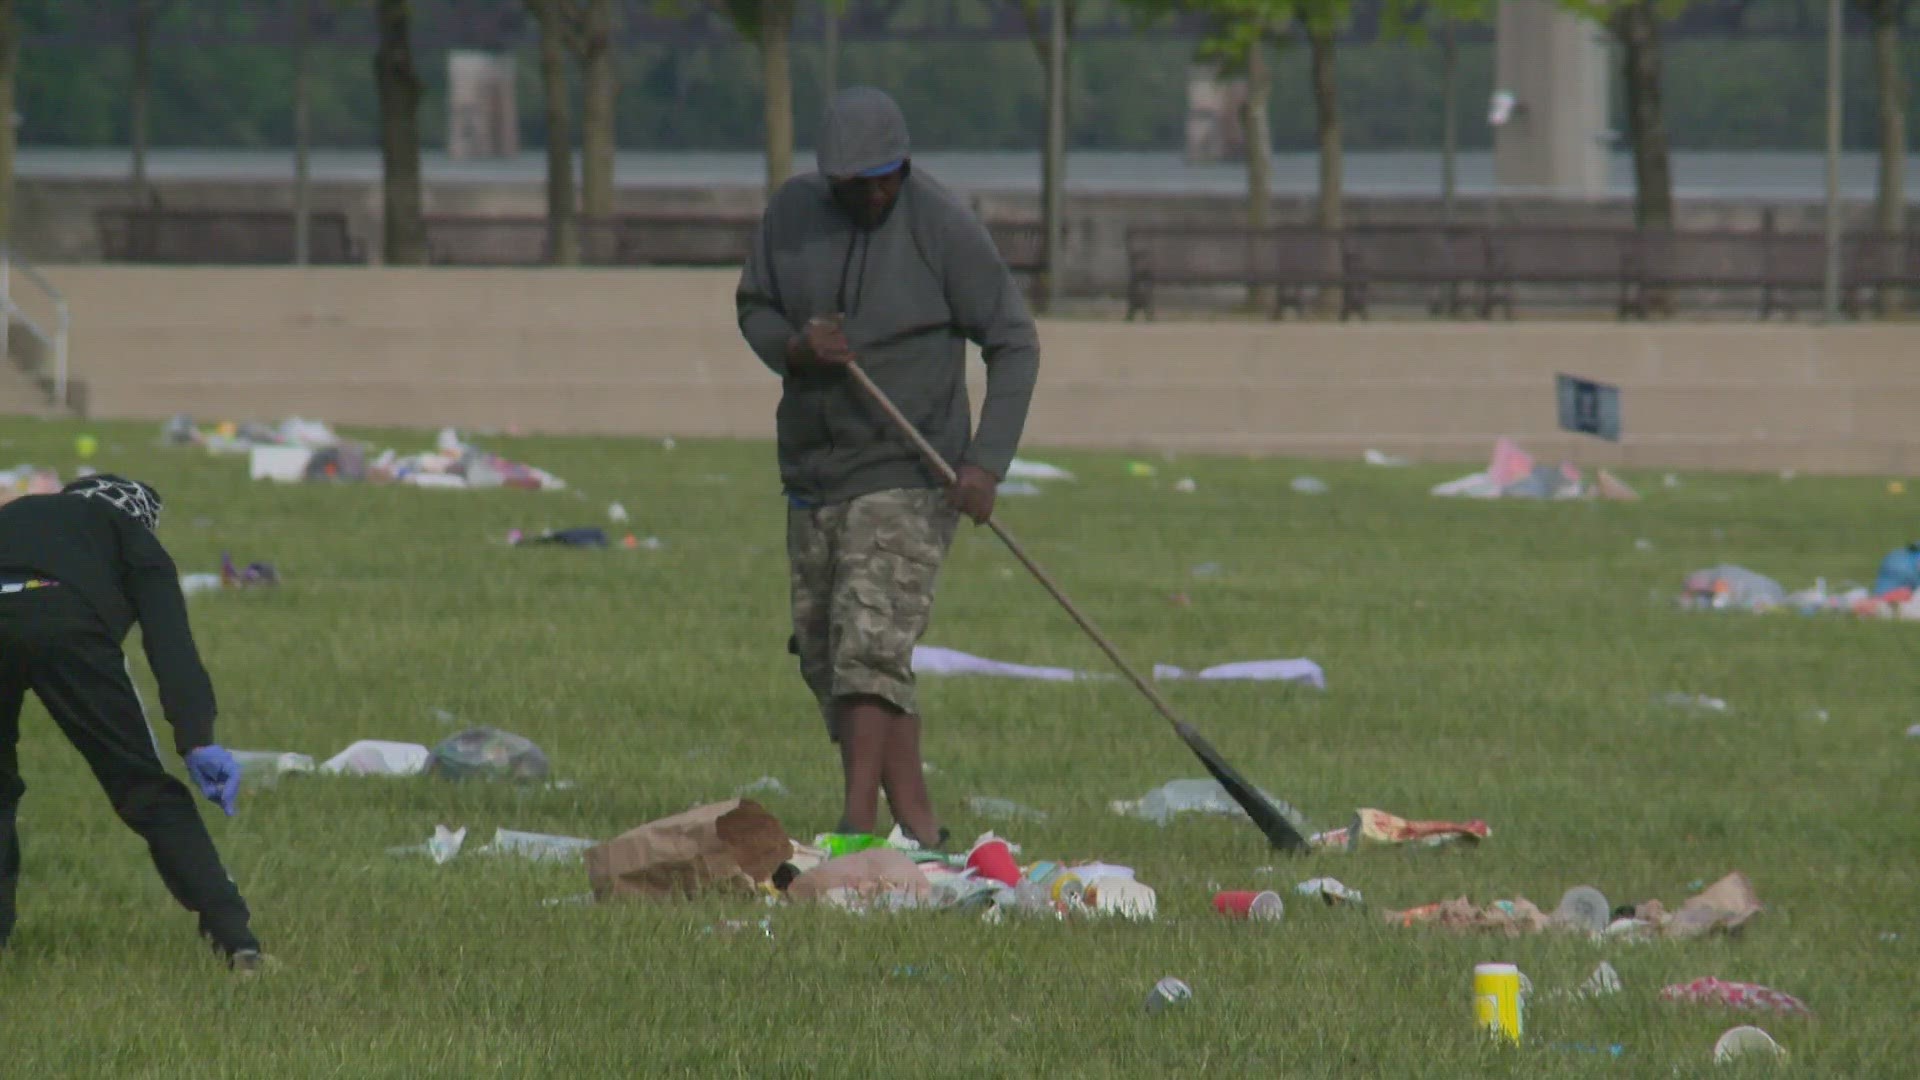 A little after the opening festivities of the Kentucky Derby Festival ended, crews began clearing tons of trash left behind by patrons along the Waterfront.